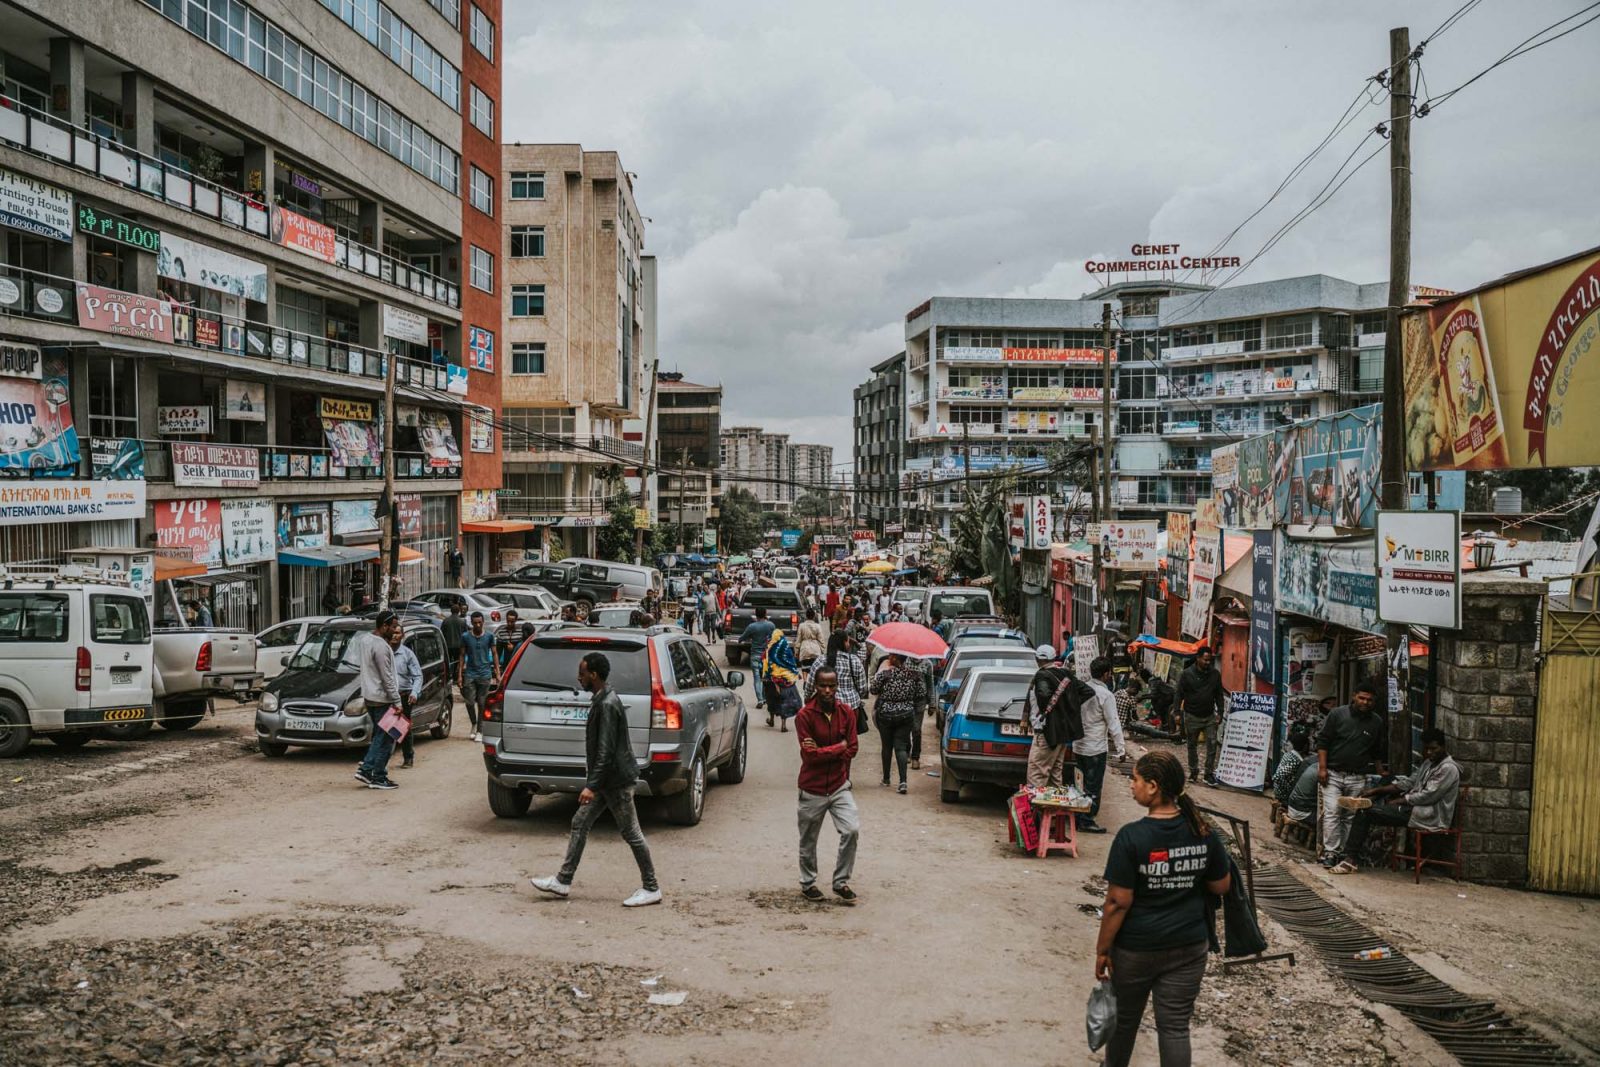 Intro to Ethiopia: Things to do in Addis Ababa